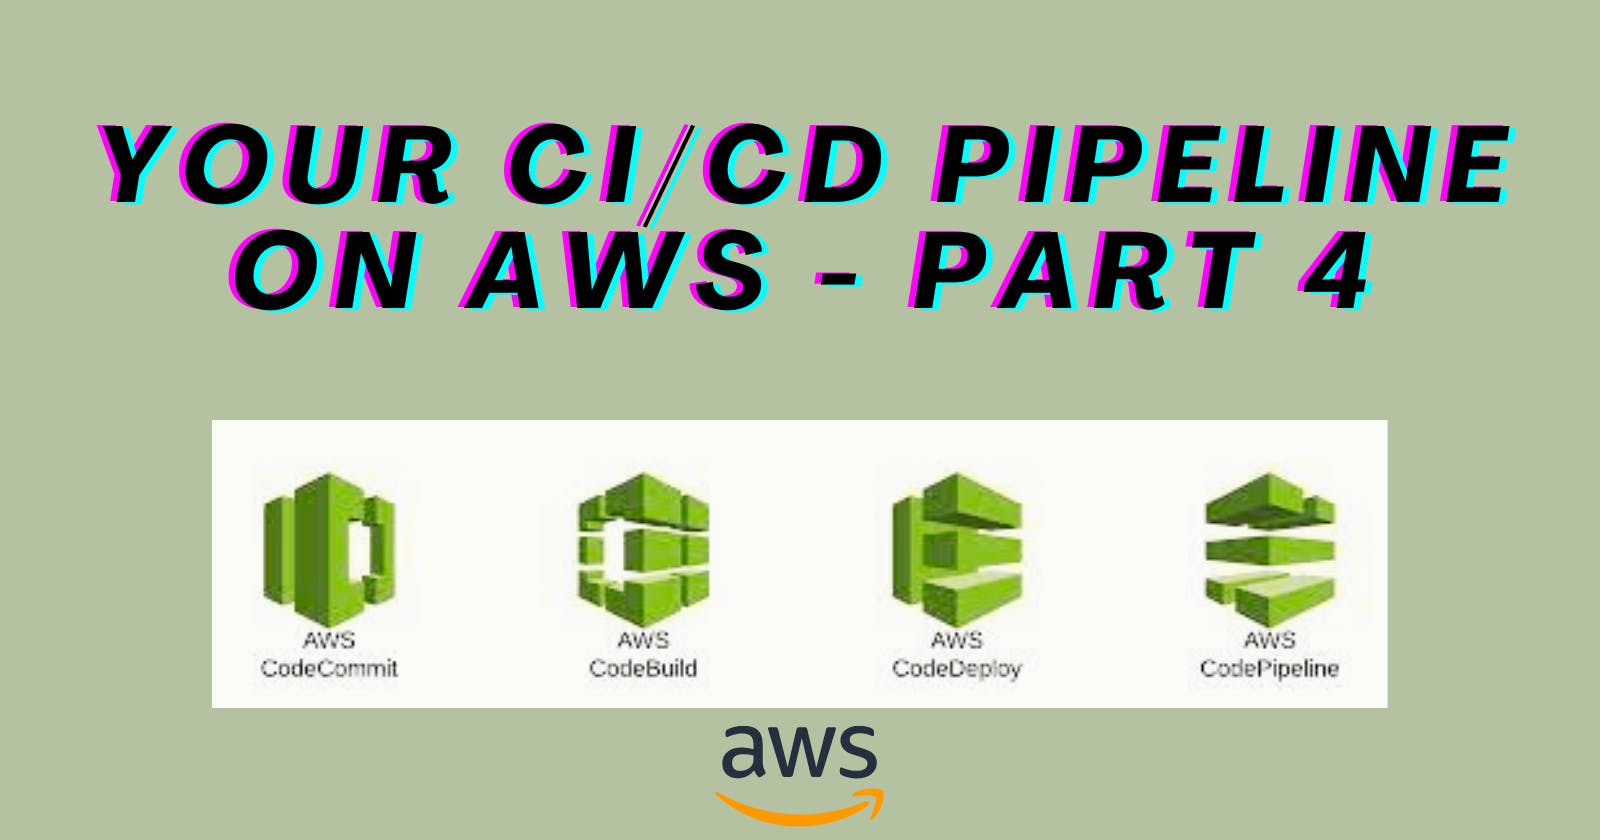 Day 53: Your CI/CD pipeline on AWS - Part 4 🚀 ☁